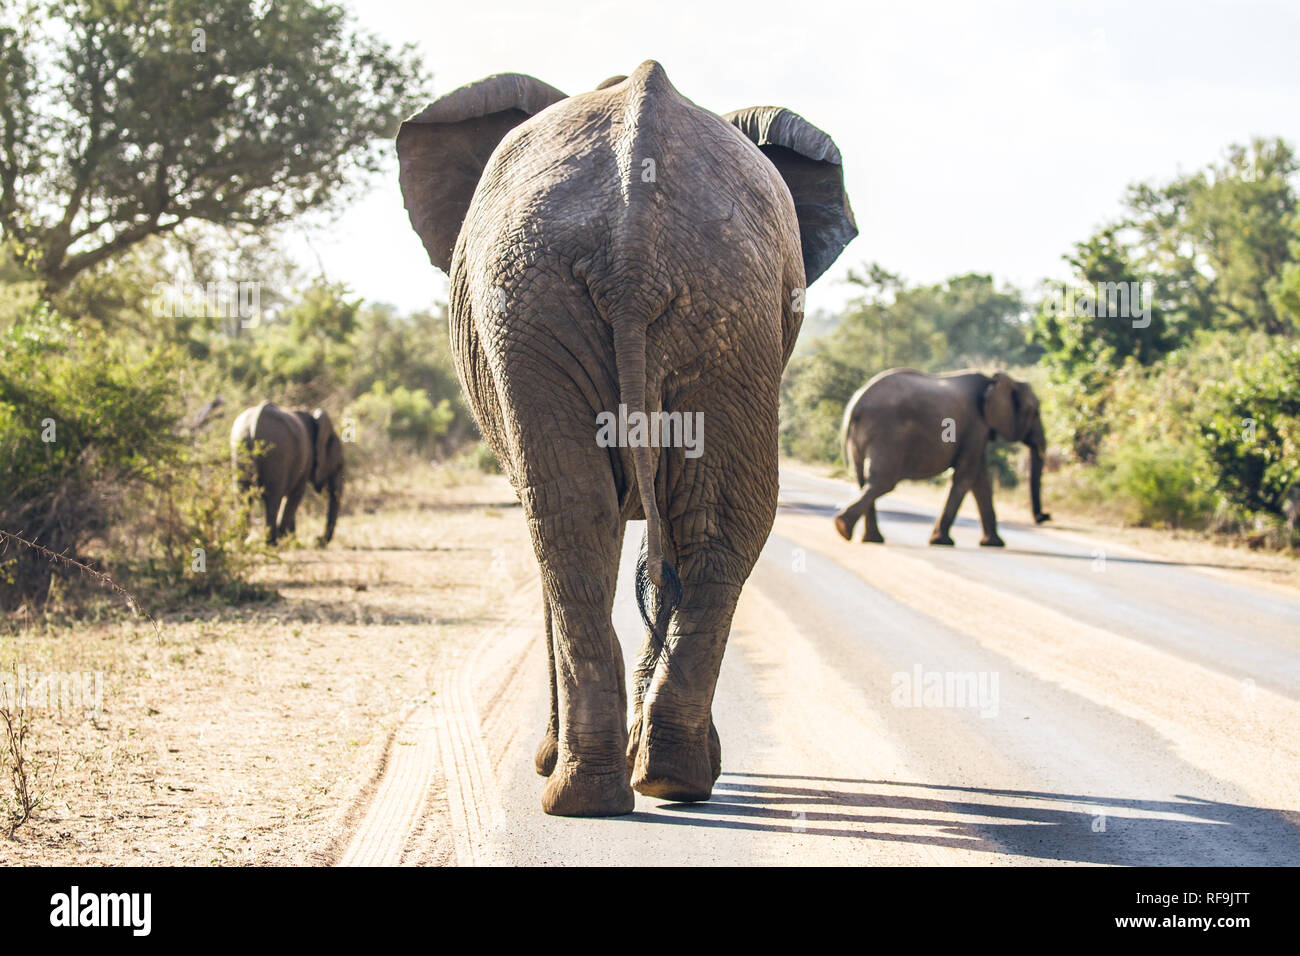 An elephant walking on the road in Kruger National Park in South Africa Stock Photo